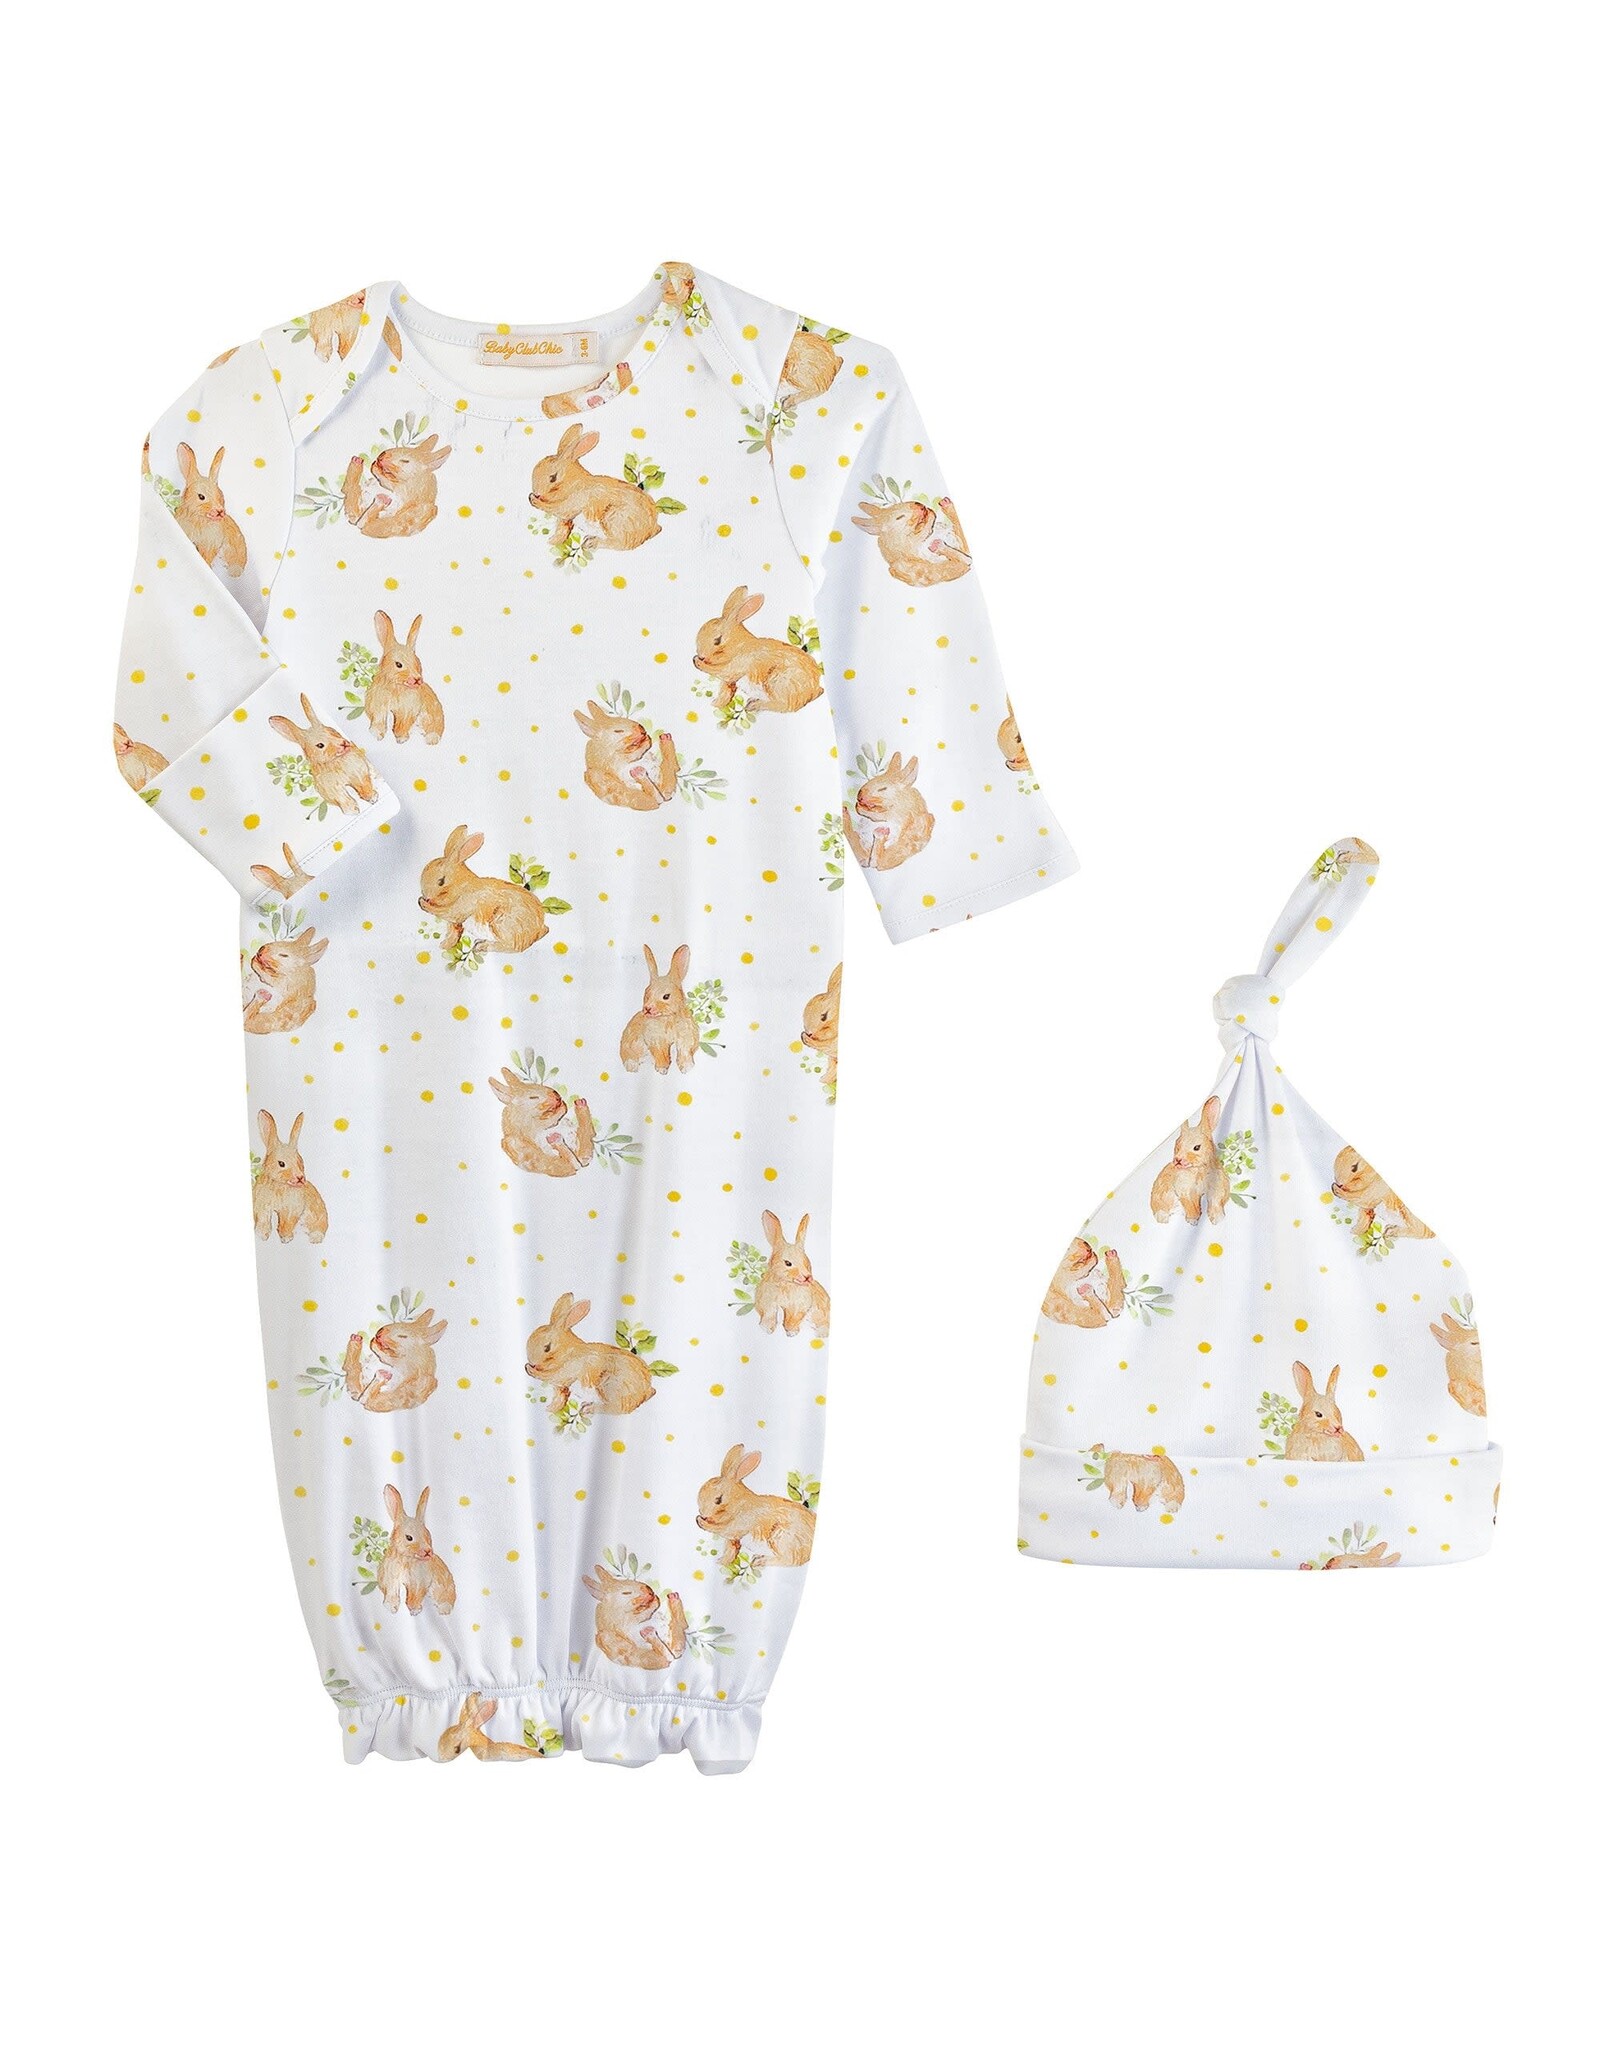 Baby Club Chic Adorable Bunnies Gown & Hat Set